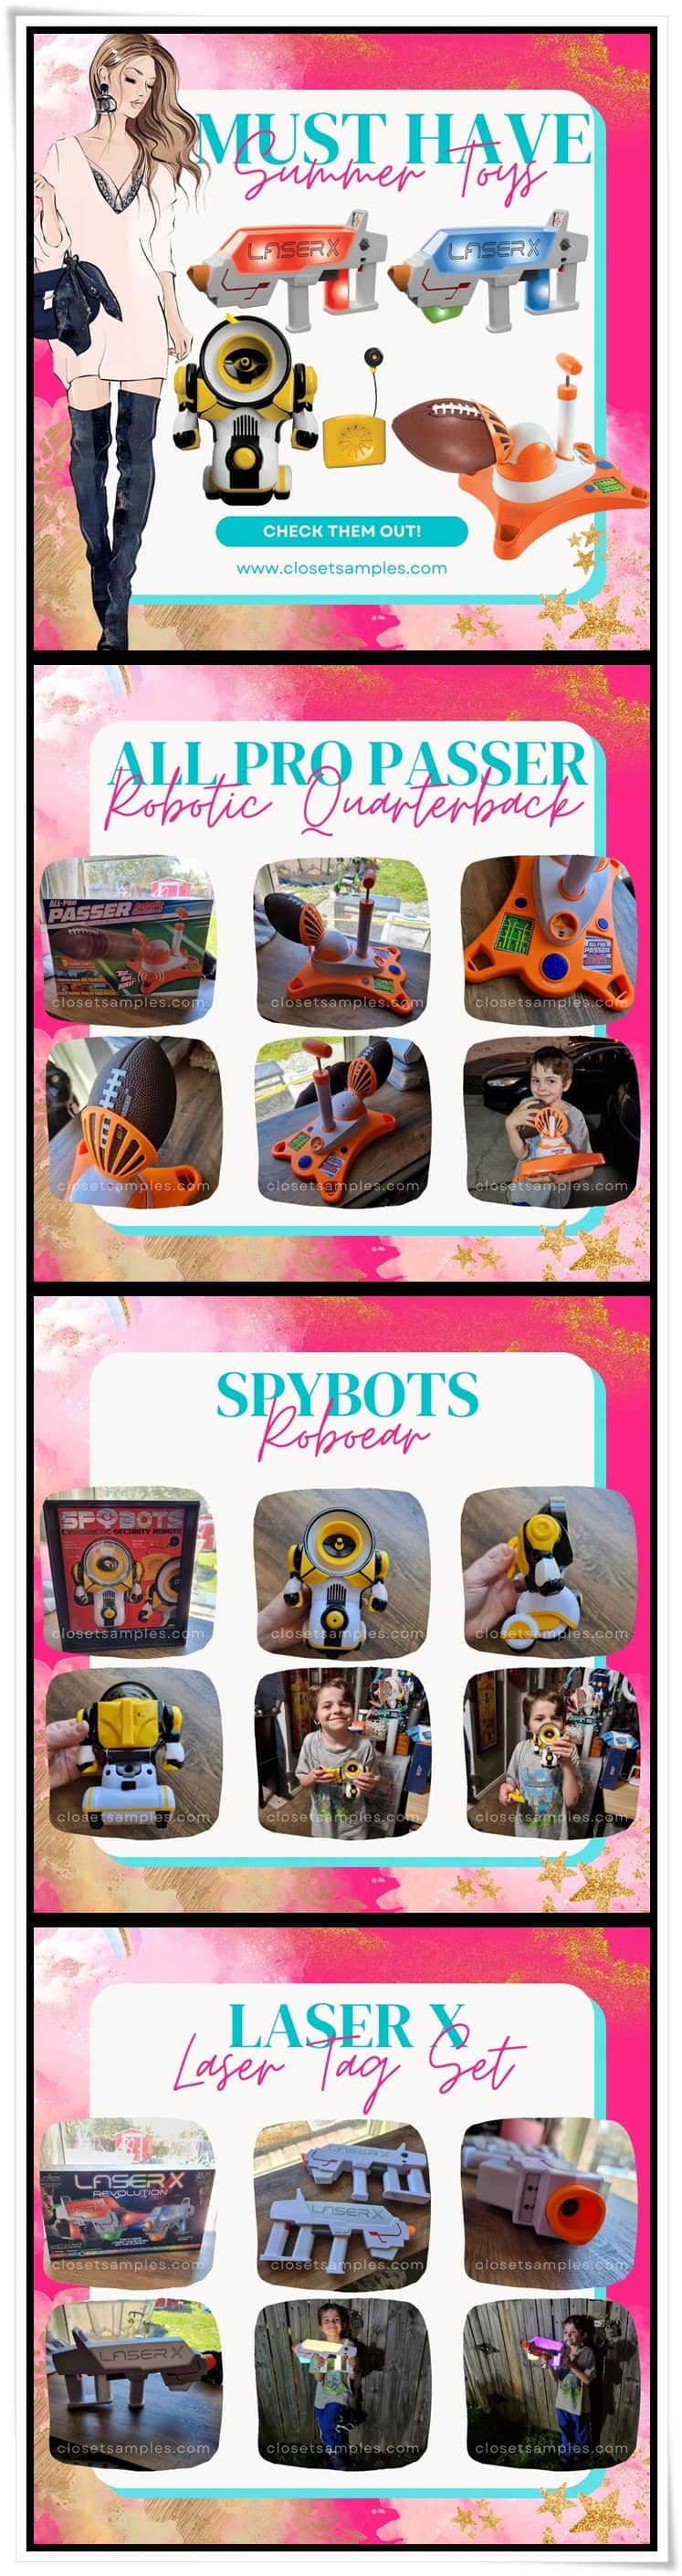 Must Have Family Toys for this Summer review closetsamples All Pro Passer spybot laserx guns Pinterest s